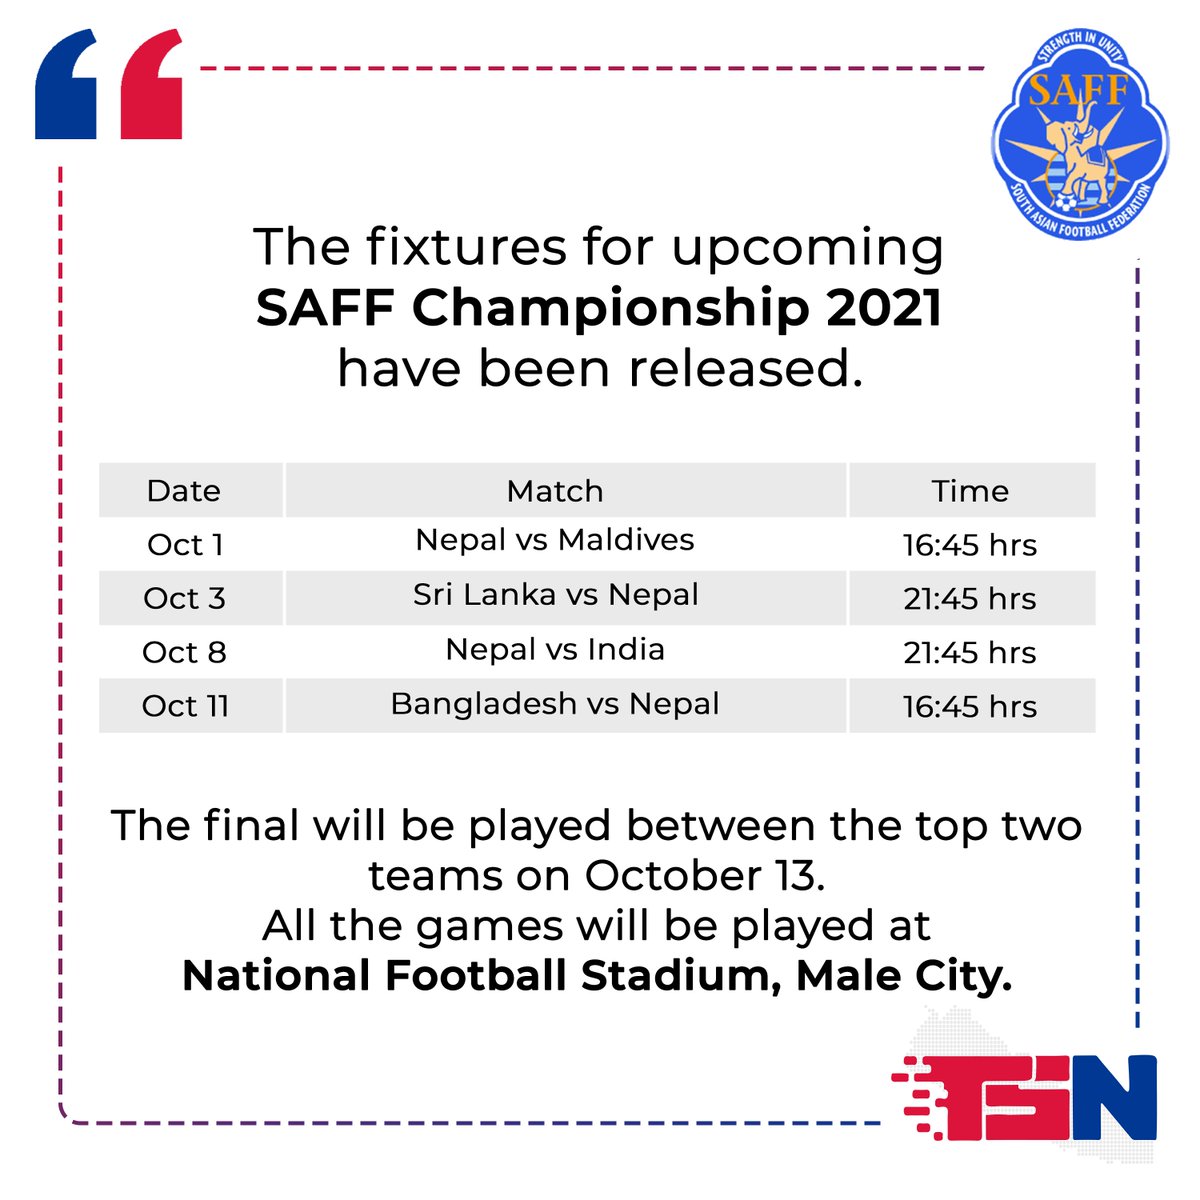 After the suspension of Pakistan and withdrawal of Bhutan, the format was changed from group and knockout stage to a single group round-robin format where the top 2 teams advance to the final.

#SAFF #saffchampionship #SAFF2021 #ANFA #NepalFootball #FootballNepal #Nepal #NEPvIND